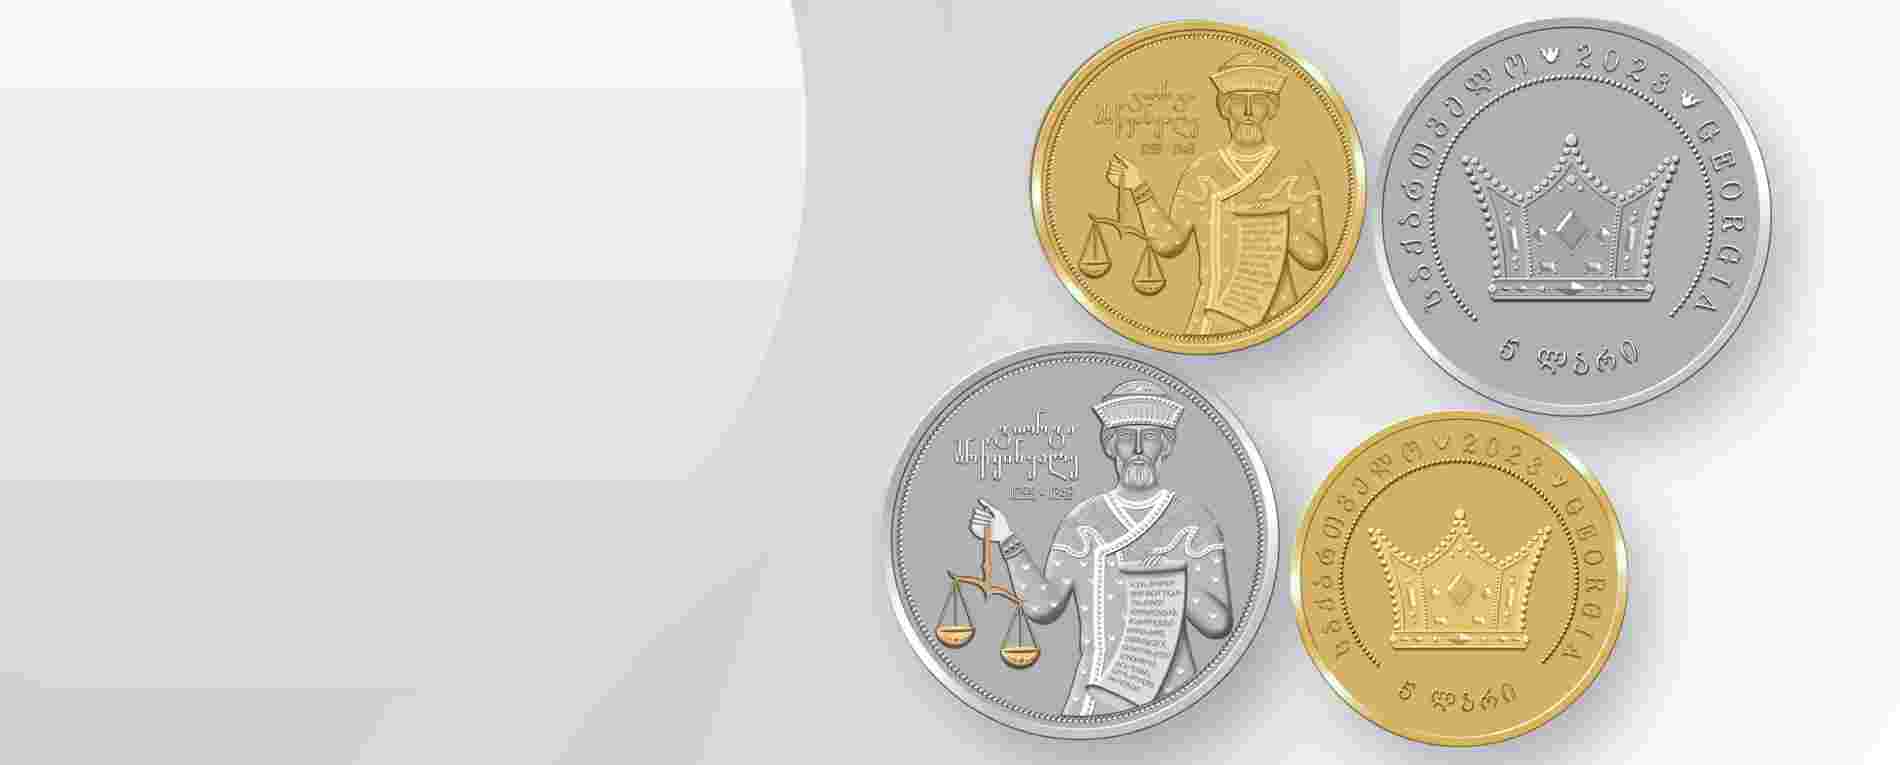 New collector coins within the coin series of "Kings of Georgia" 